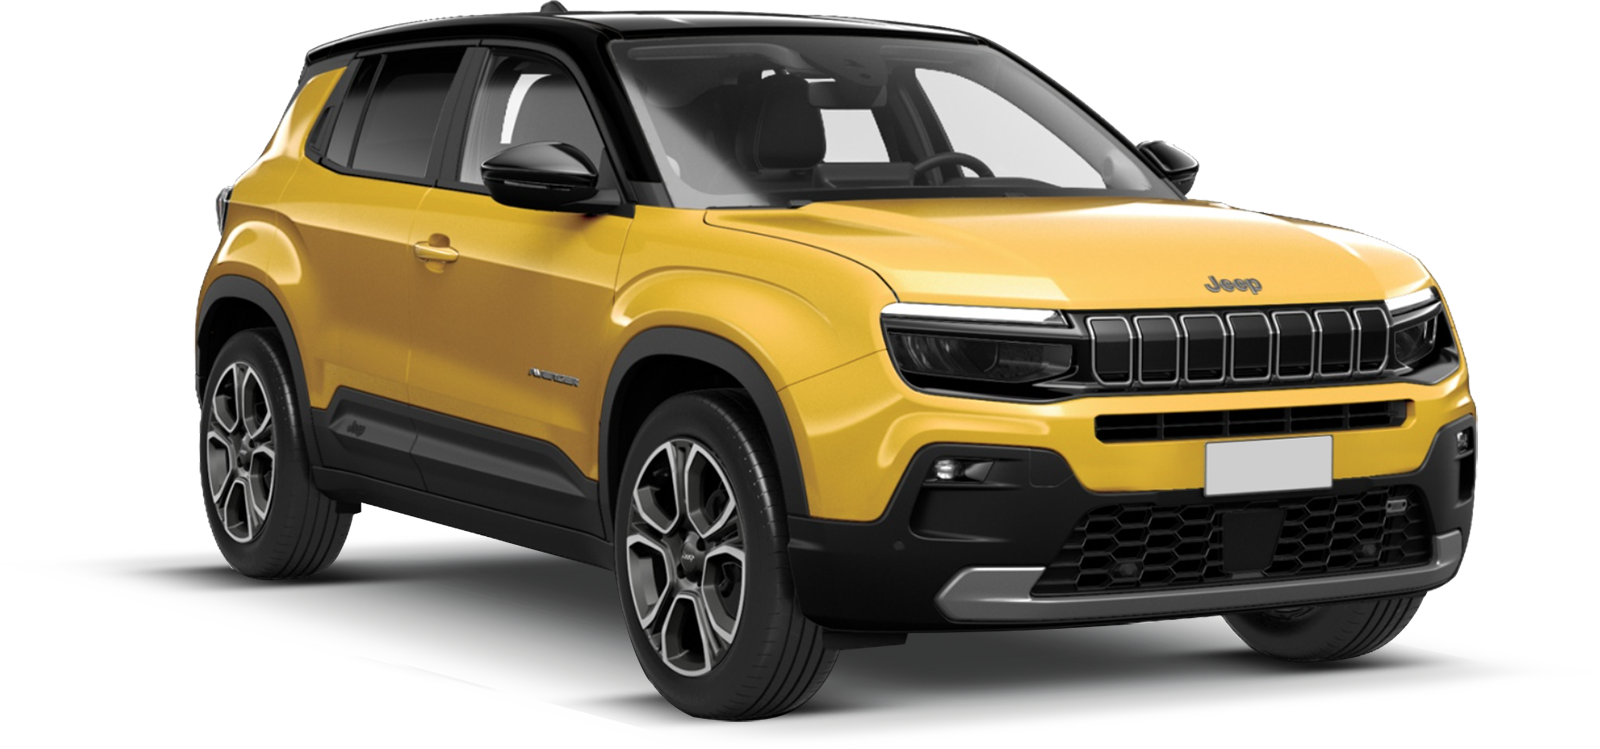 https://immagini.alvolante.it/sites/default/files/styles/image_gallery_big/public/serie_auto_galleria/2022/11/jeep_avenger_ant_0.png?itok=5Y9SsT1W